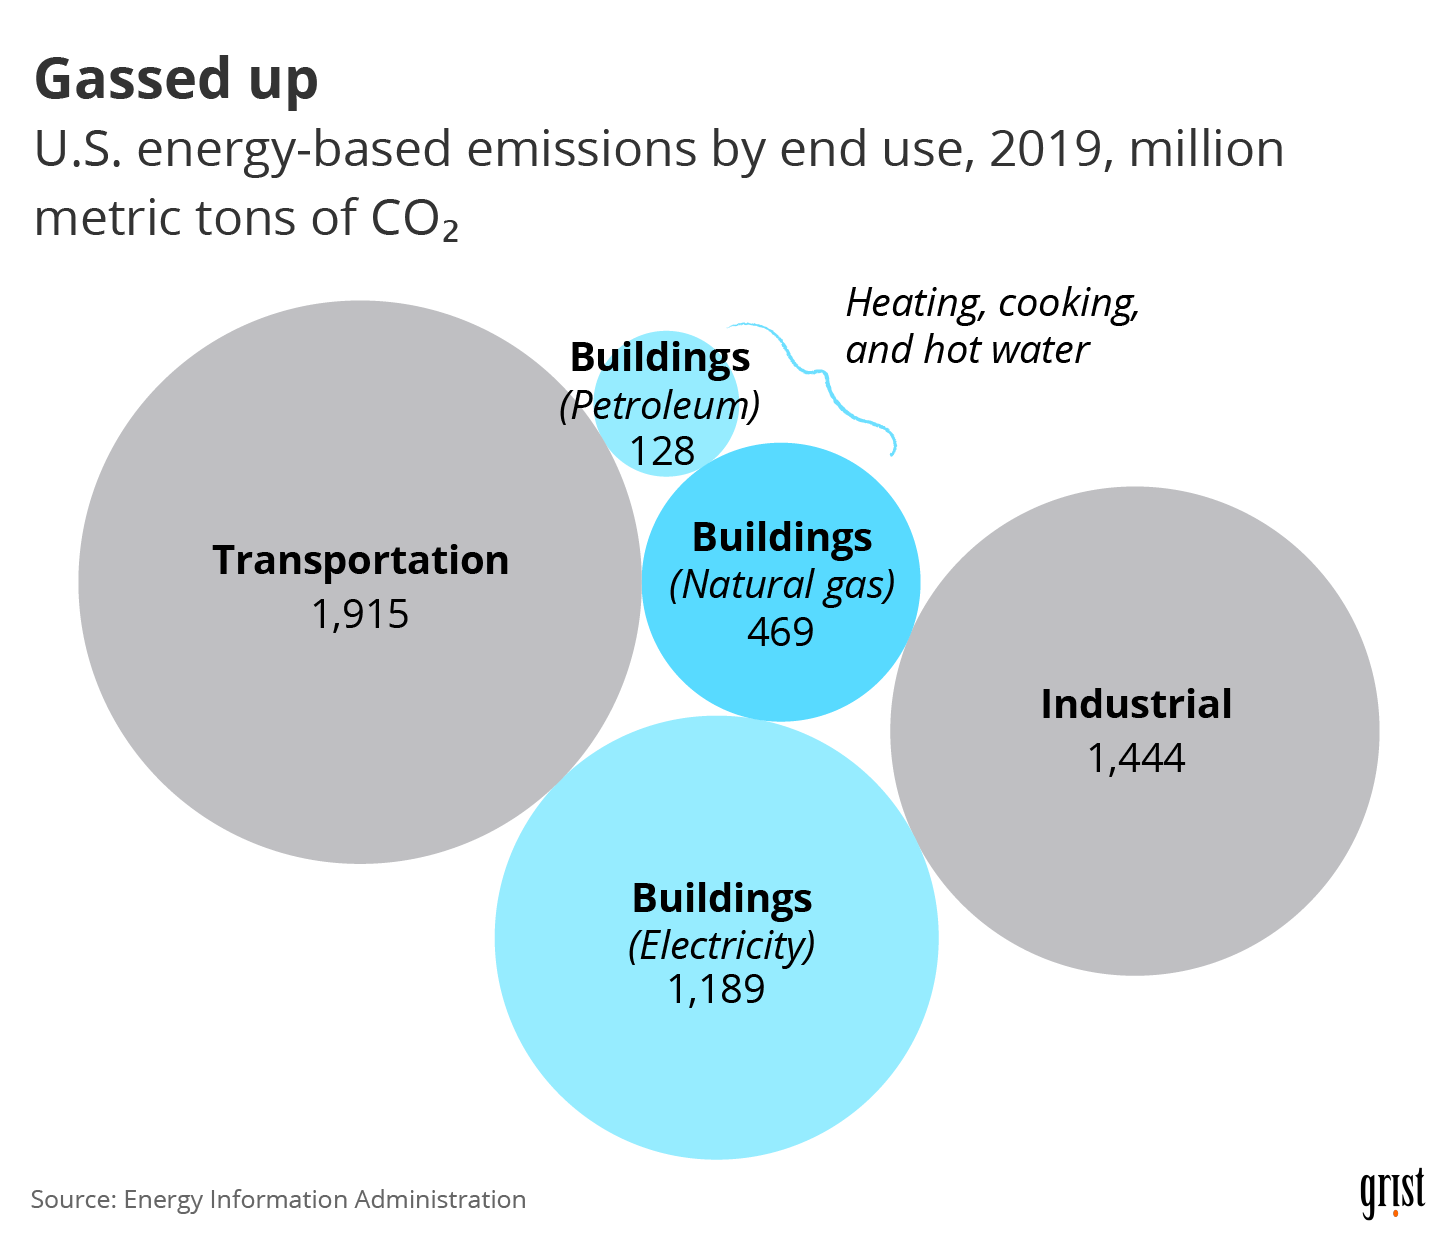 A bubble chart showing U.S. energy-based emissions by end use for 2019 in million metric tons of CO2. Burning natural gas in buildings accounted for 469 million metric tons of CO2 that year.